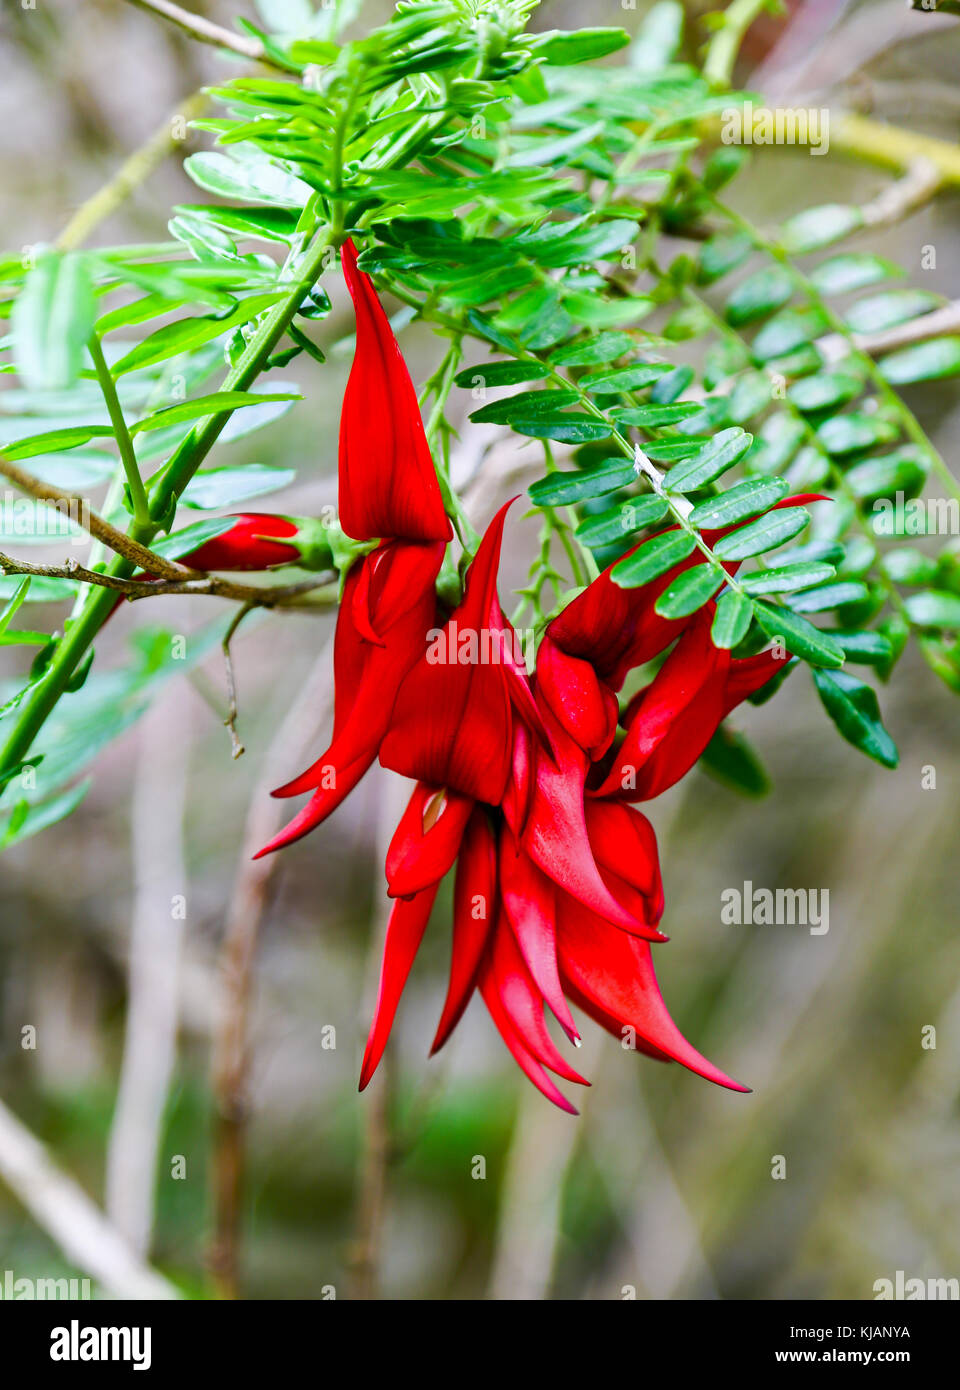 Clianthus puniceus, common name kaka beak, is a species of flowering plant in the genus Clianthus of the legume family Fabaceae, native to New Zealand Stock Photo